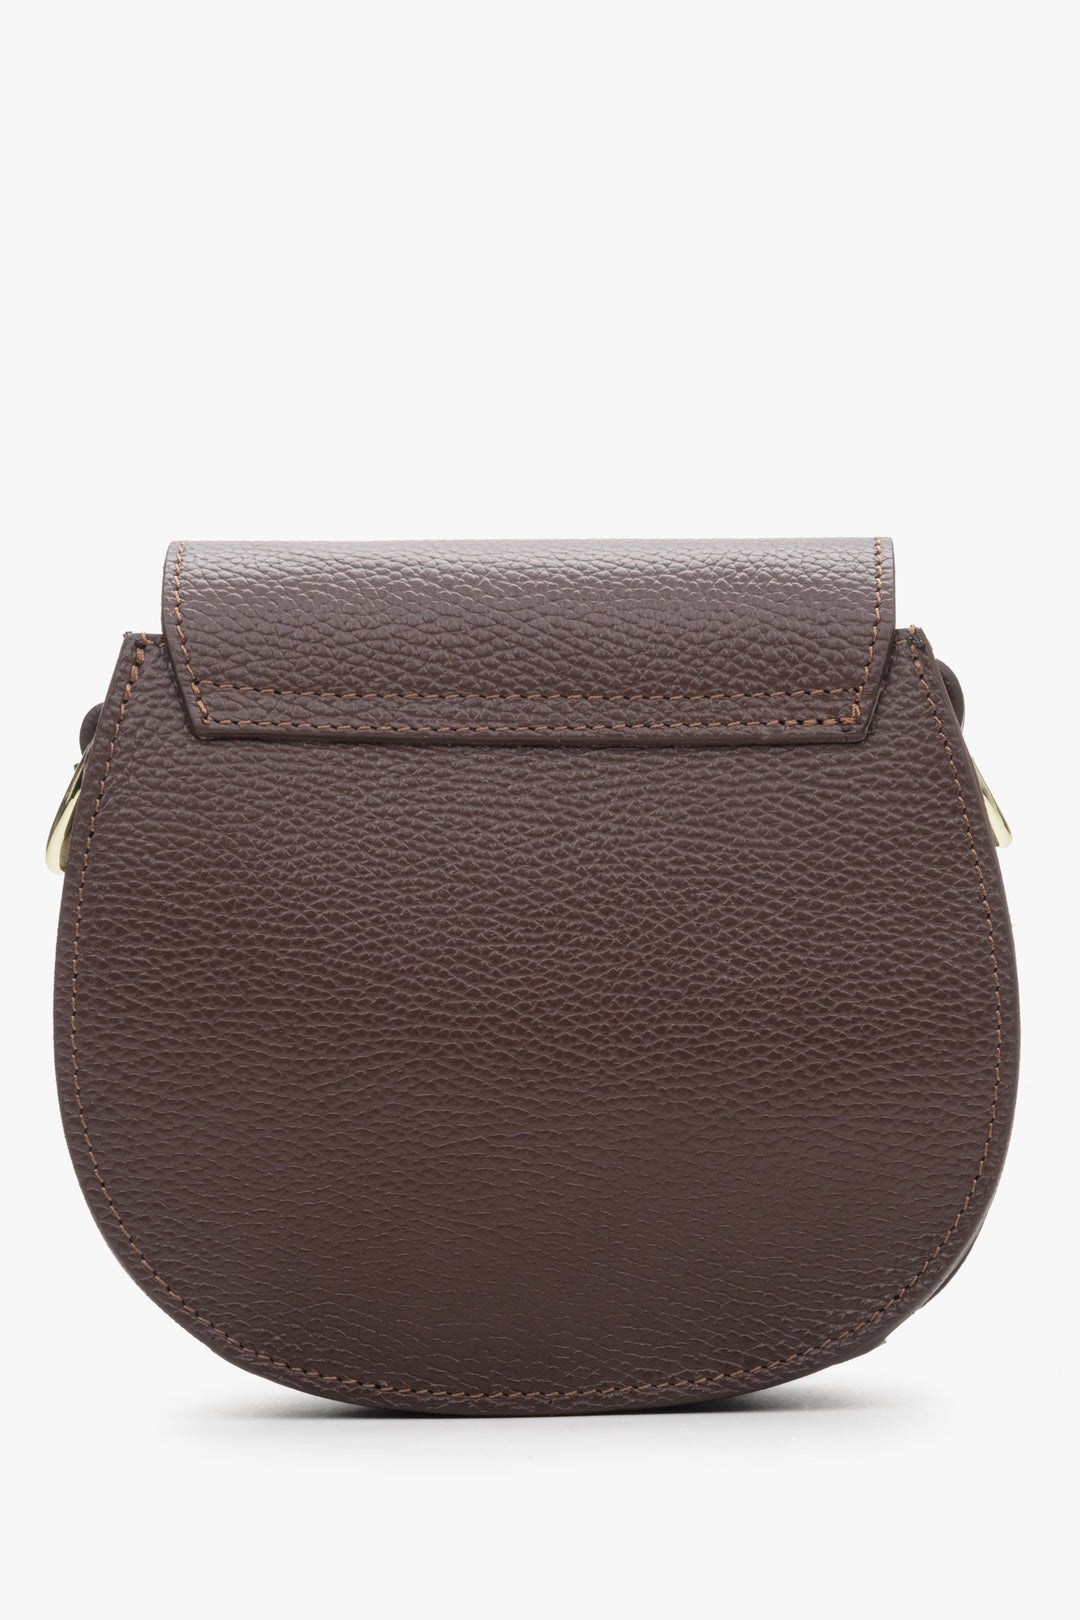 Handmade in Italy women's saddle brown leather bag.